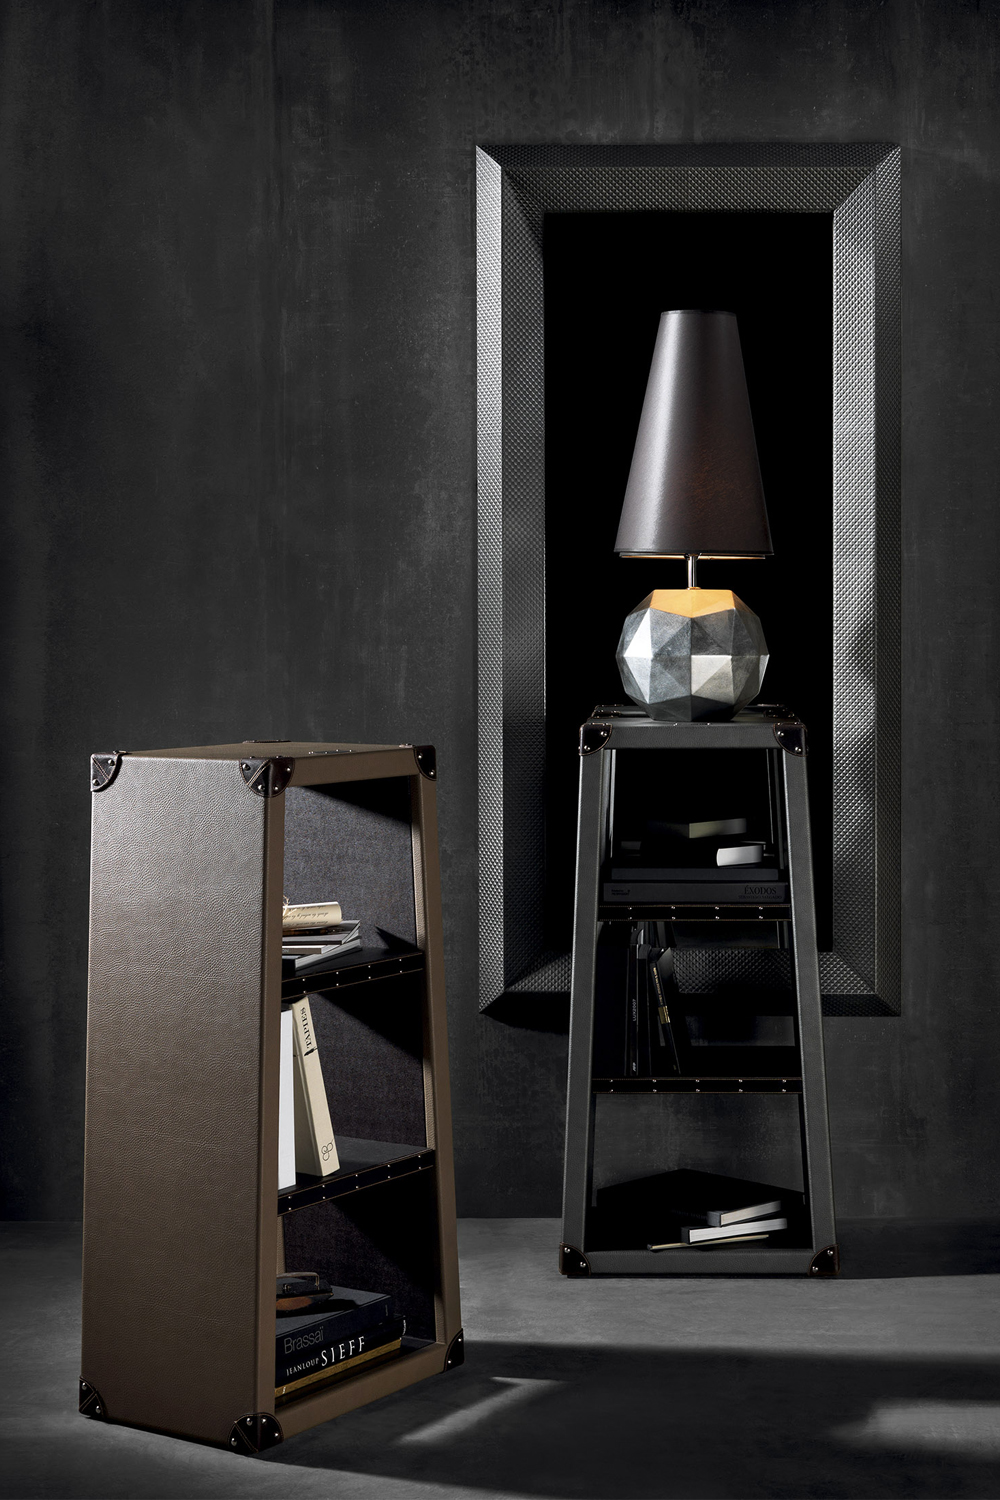 Contemporary Office shelf, The compass office desk is adorned in leather